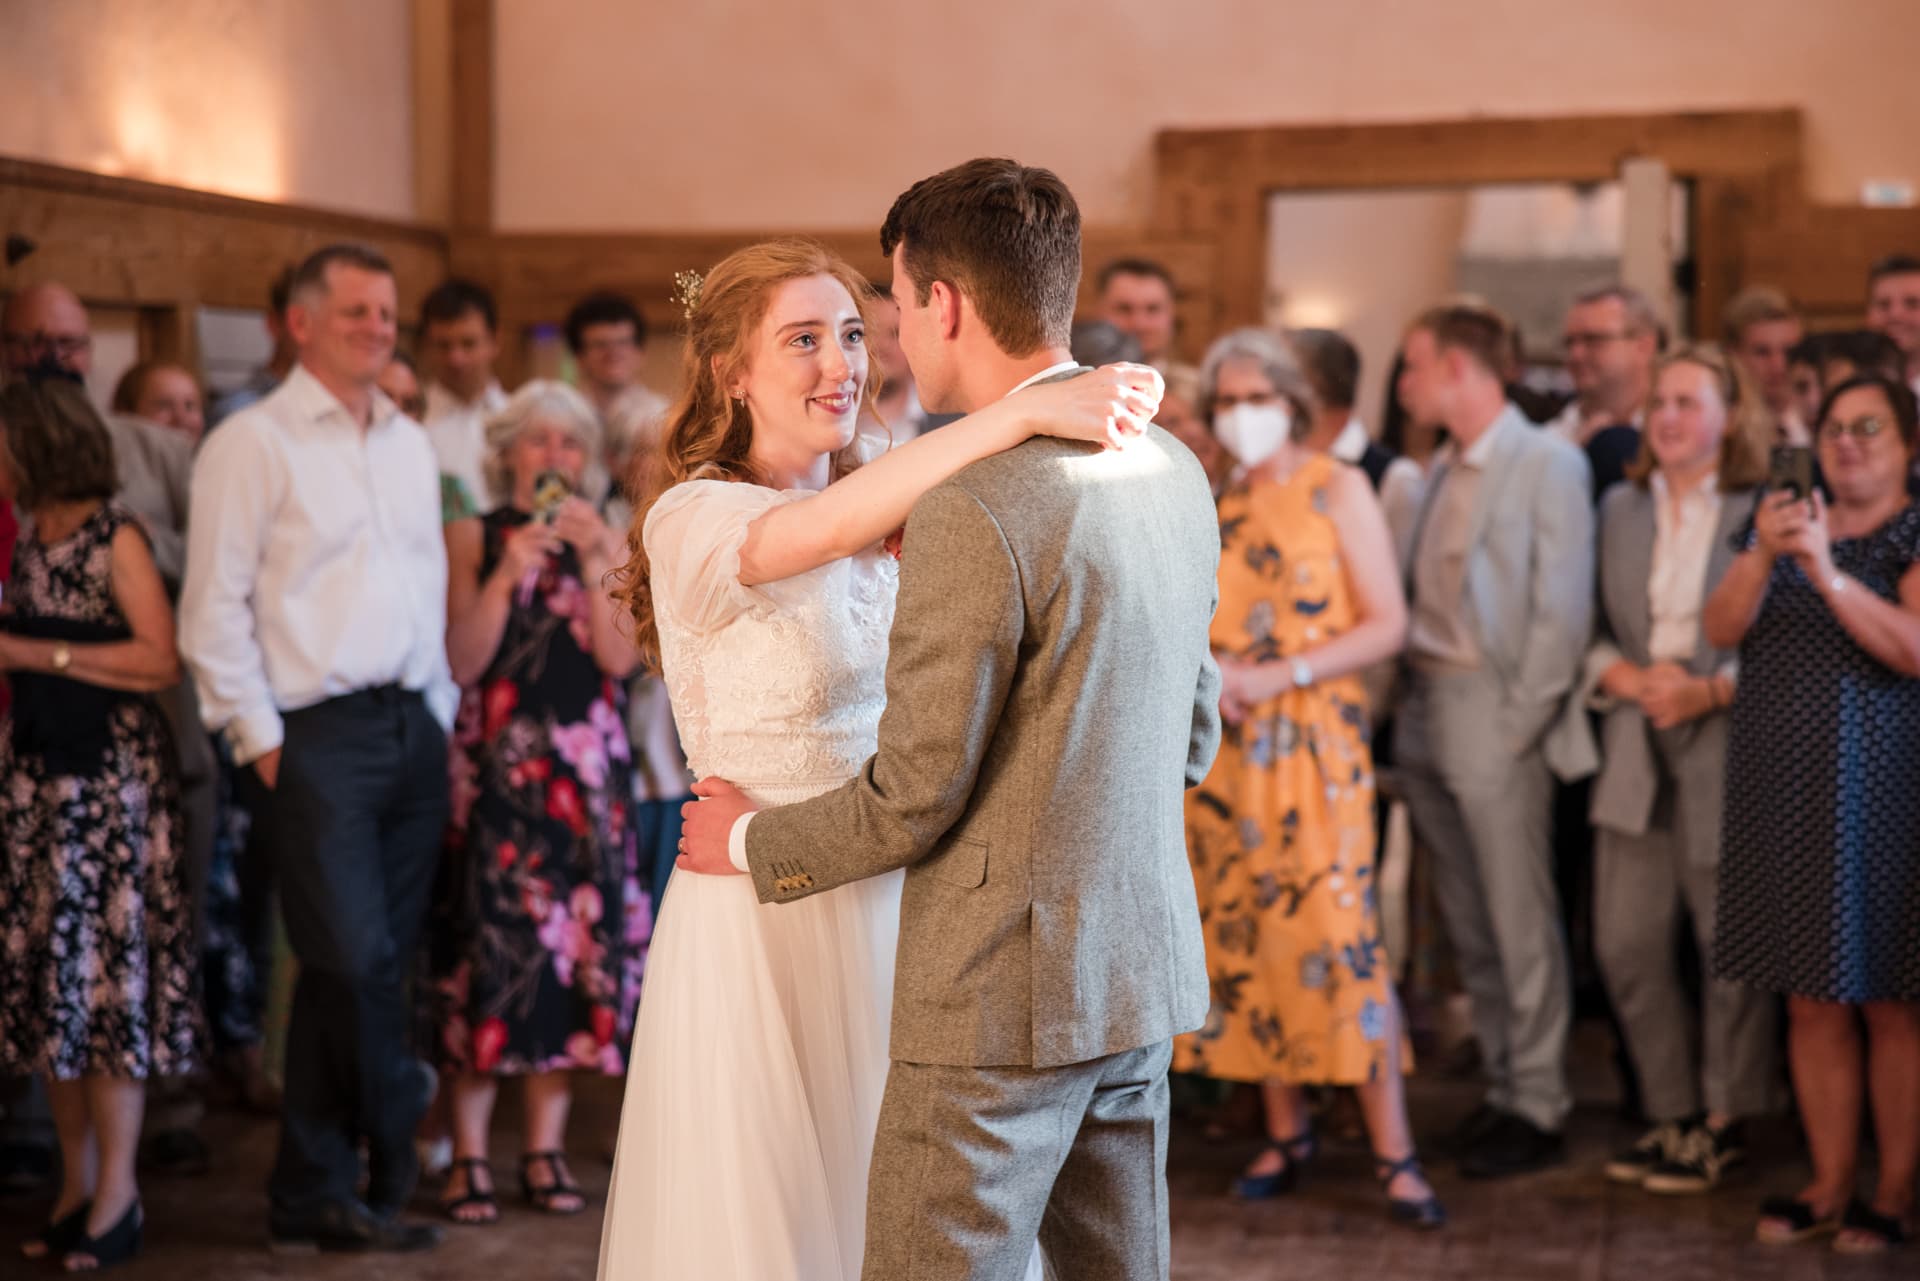 Bride and Groom first dance at Oxleaze Barn